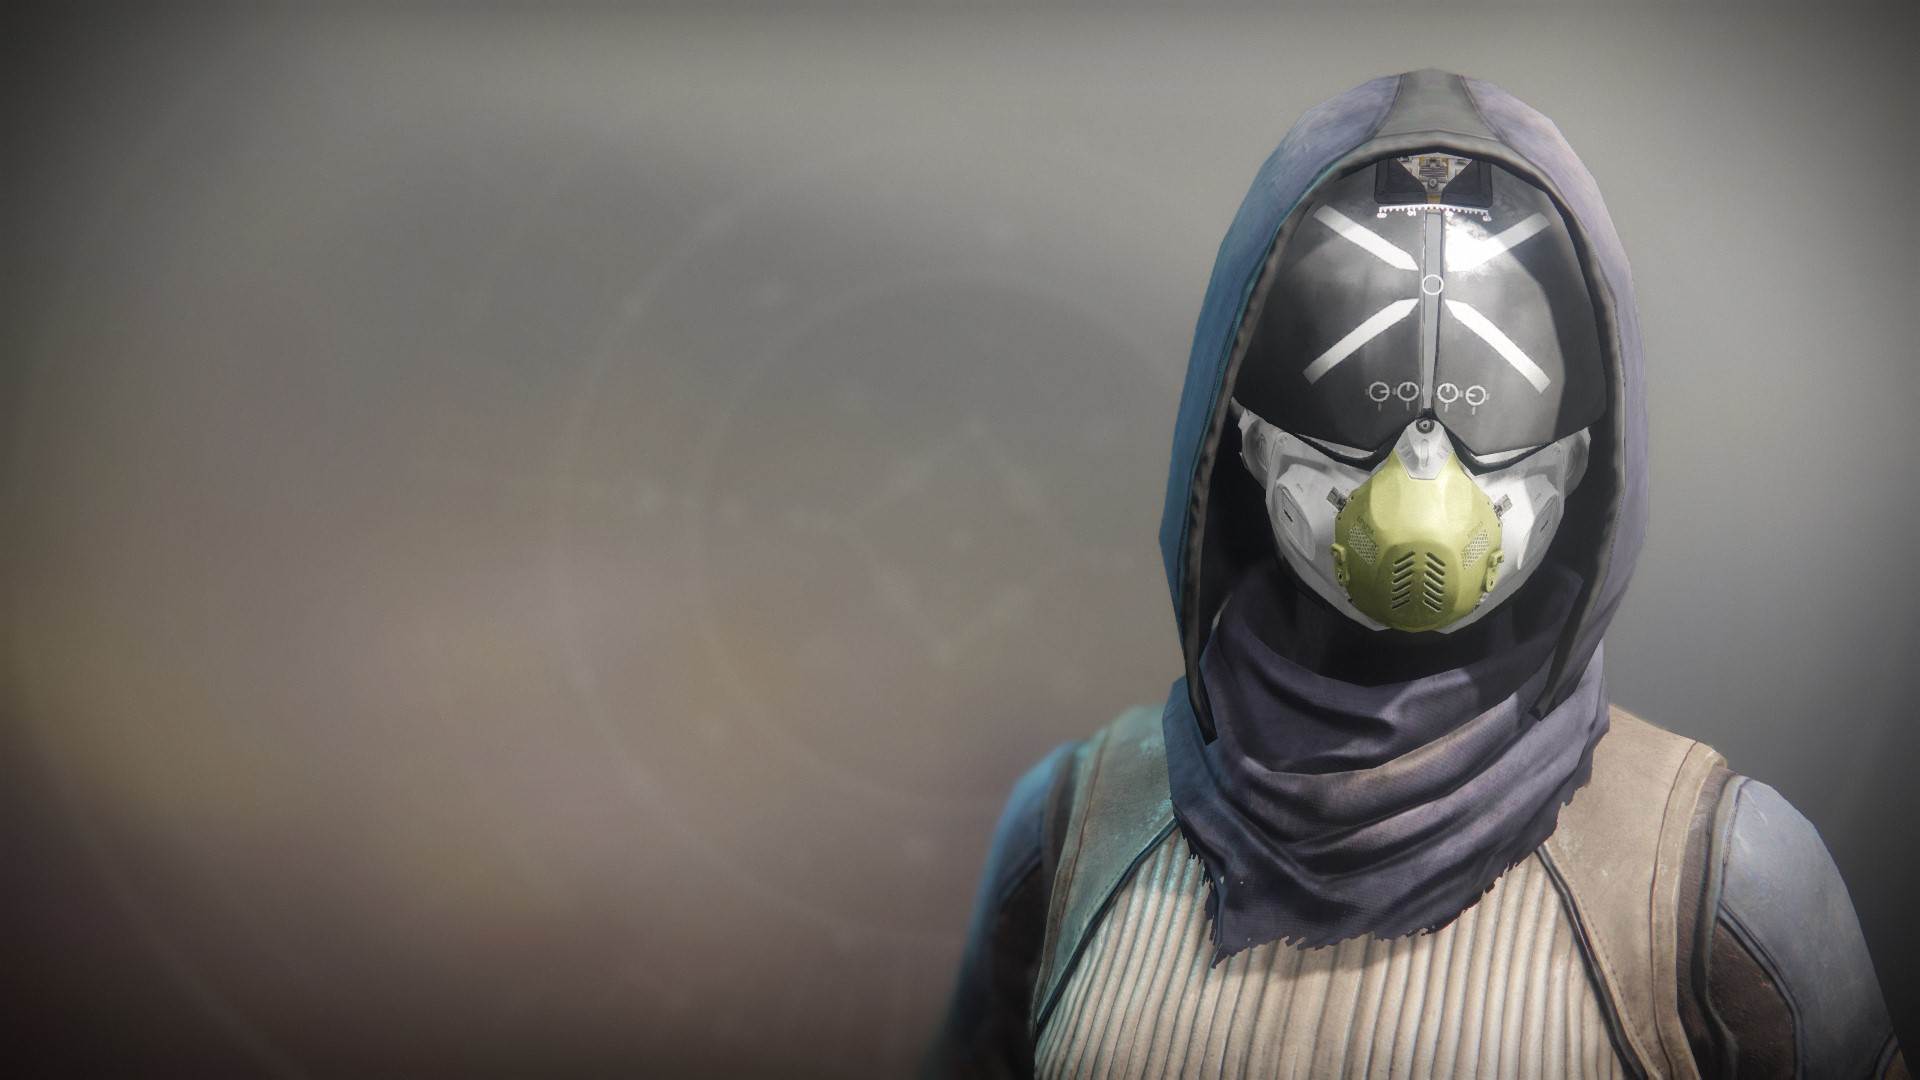 An in-game render of the Icarus Drifter Mask.